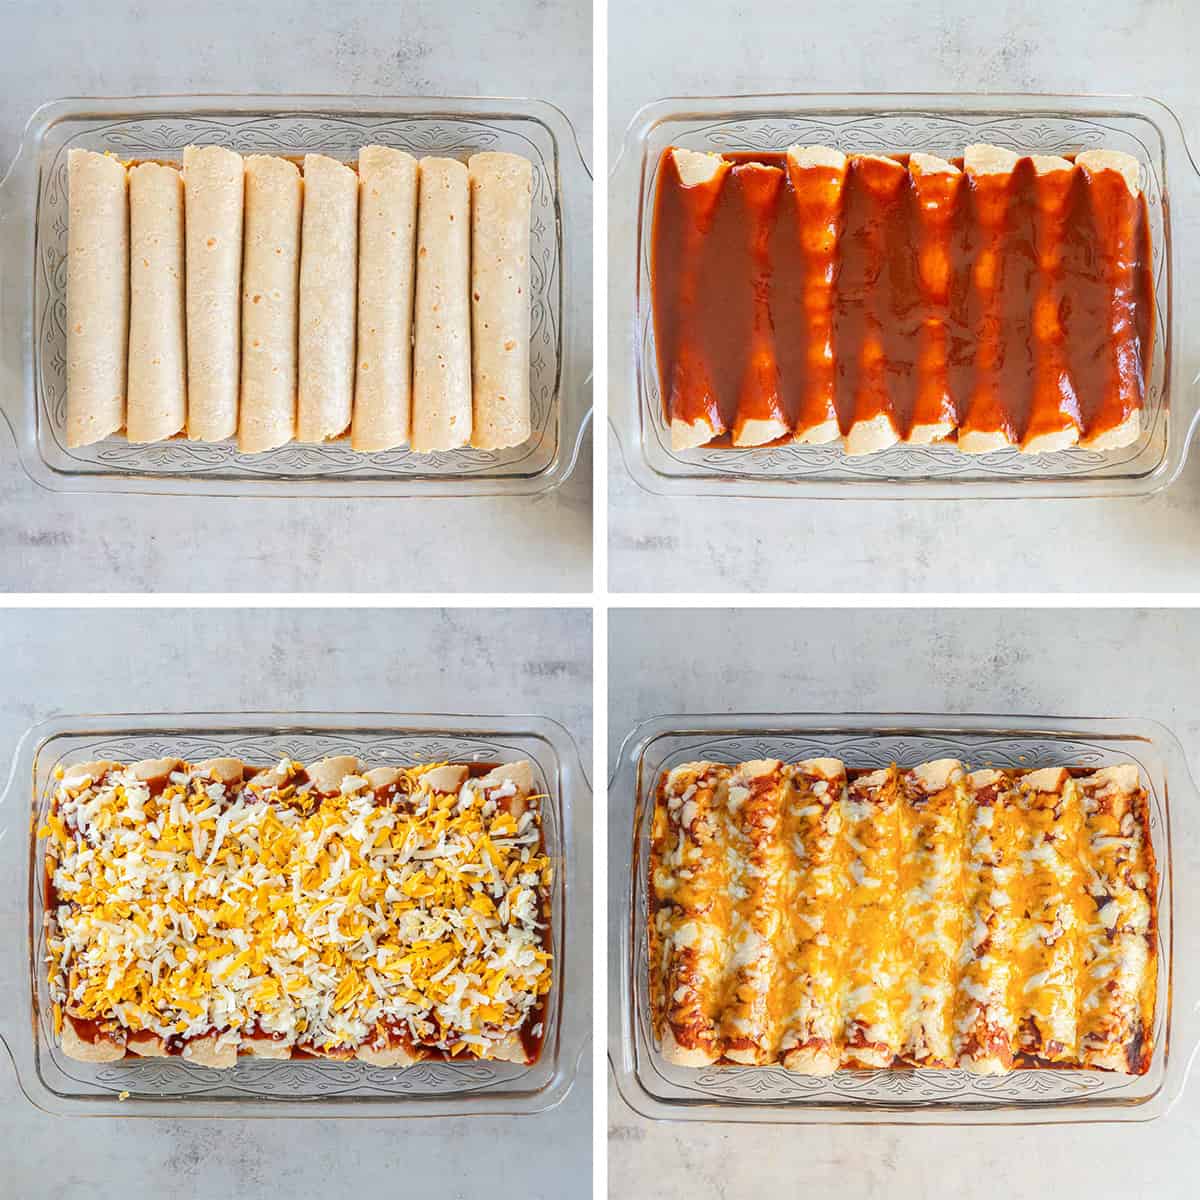 Four images of assembled enchiladas in a baking dish topped with enchilada sauce and cheese.